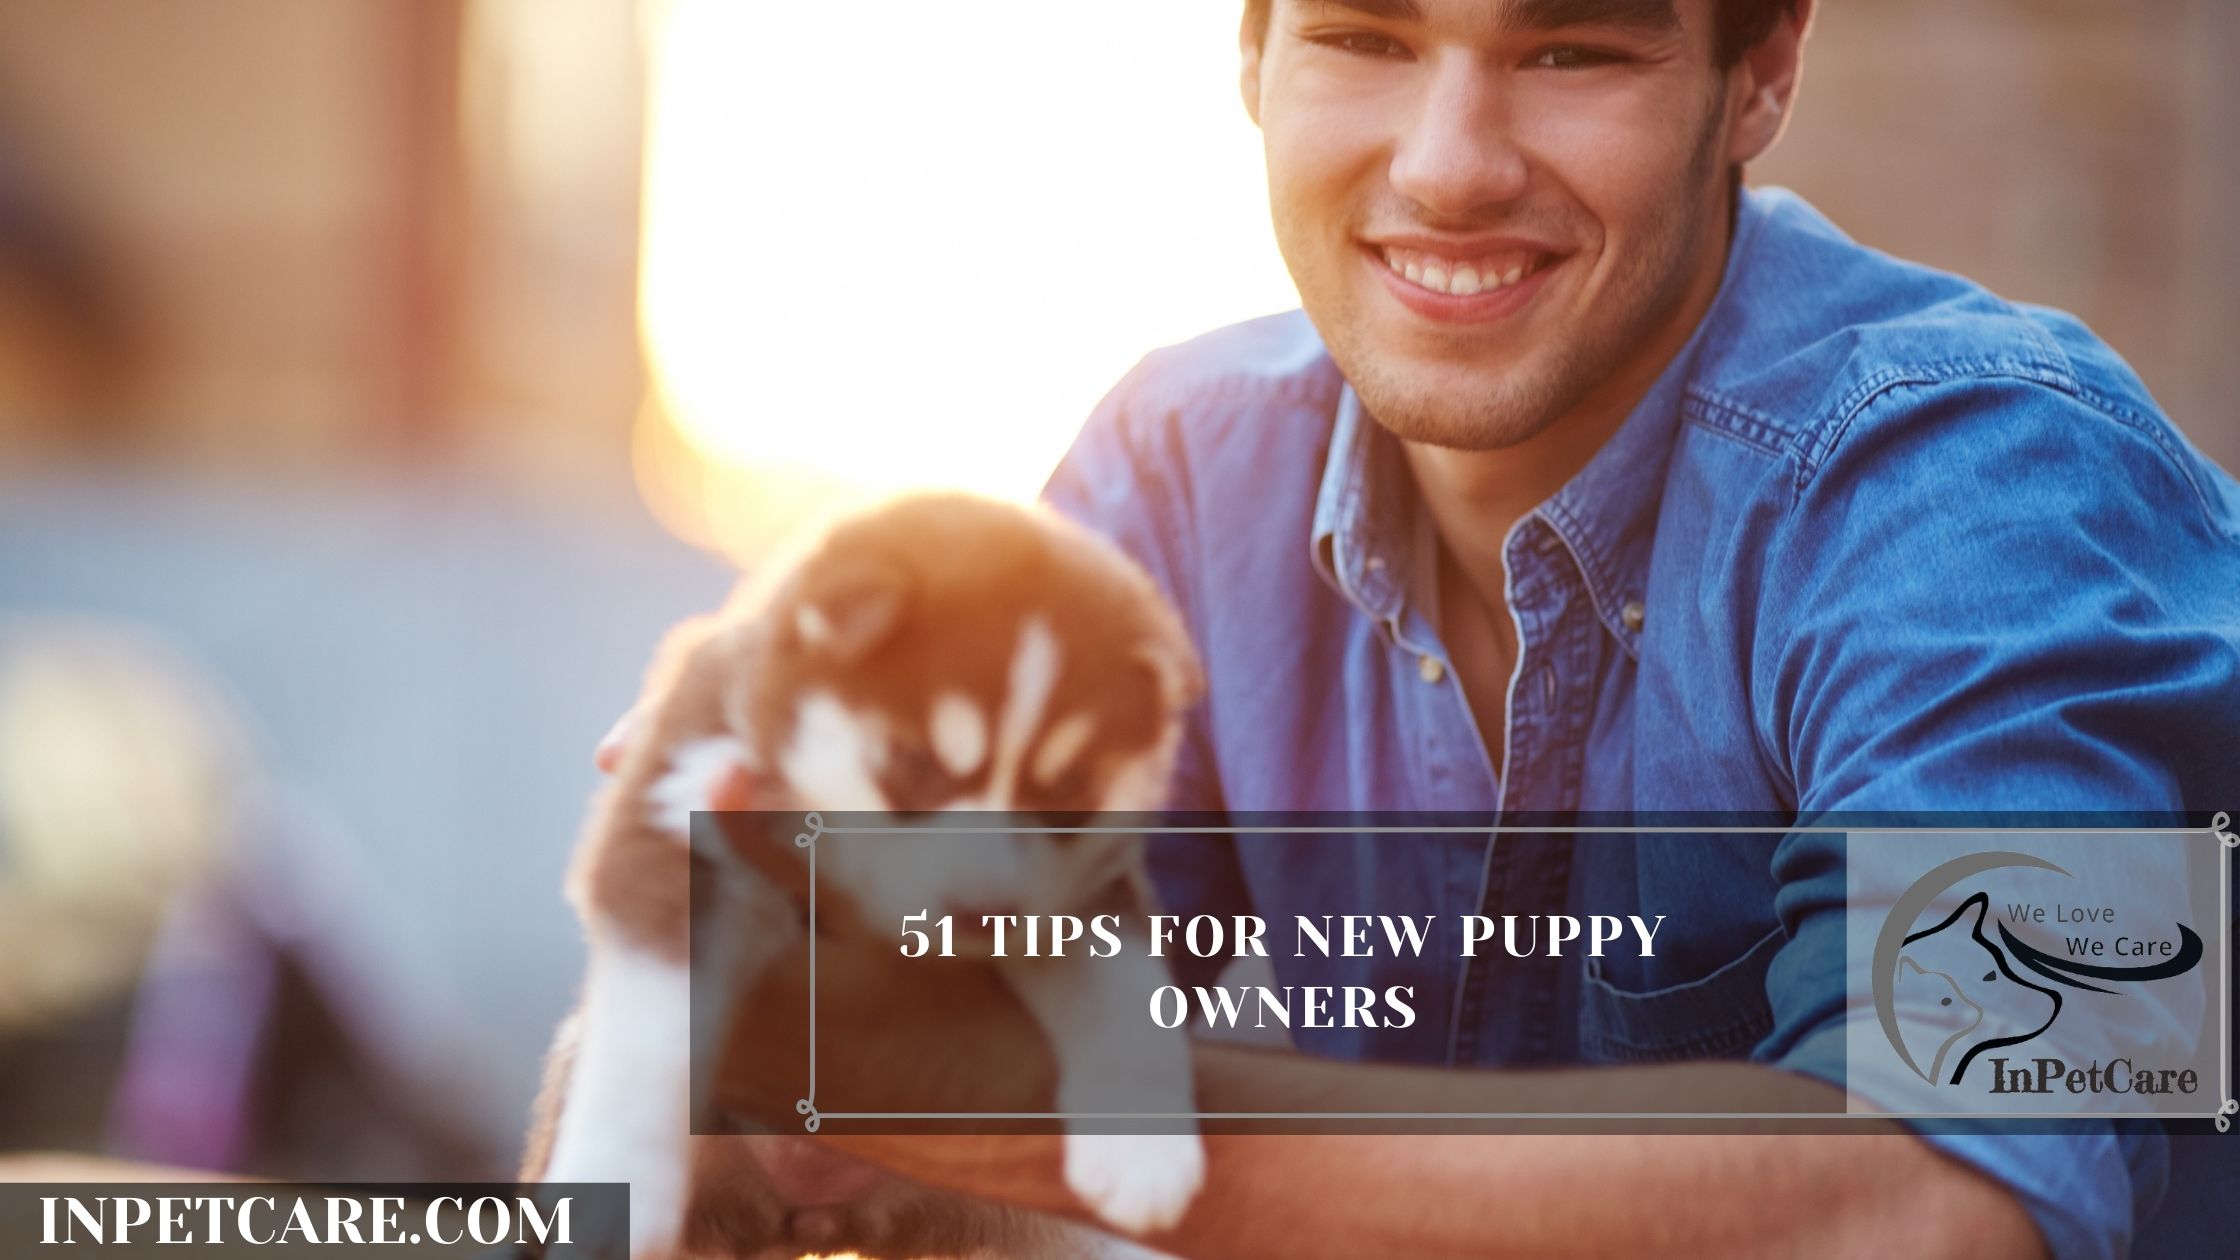 When Can You Touch a Newborn Puppy? – 9 Things To Look